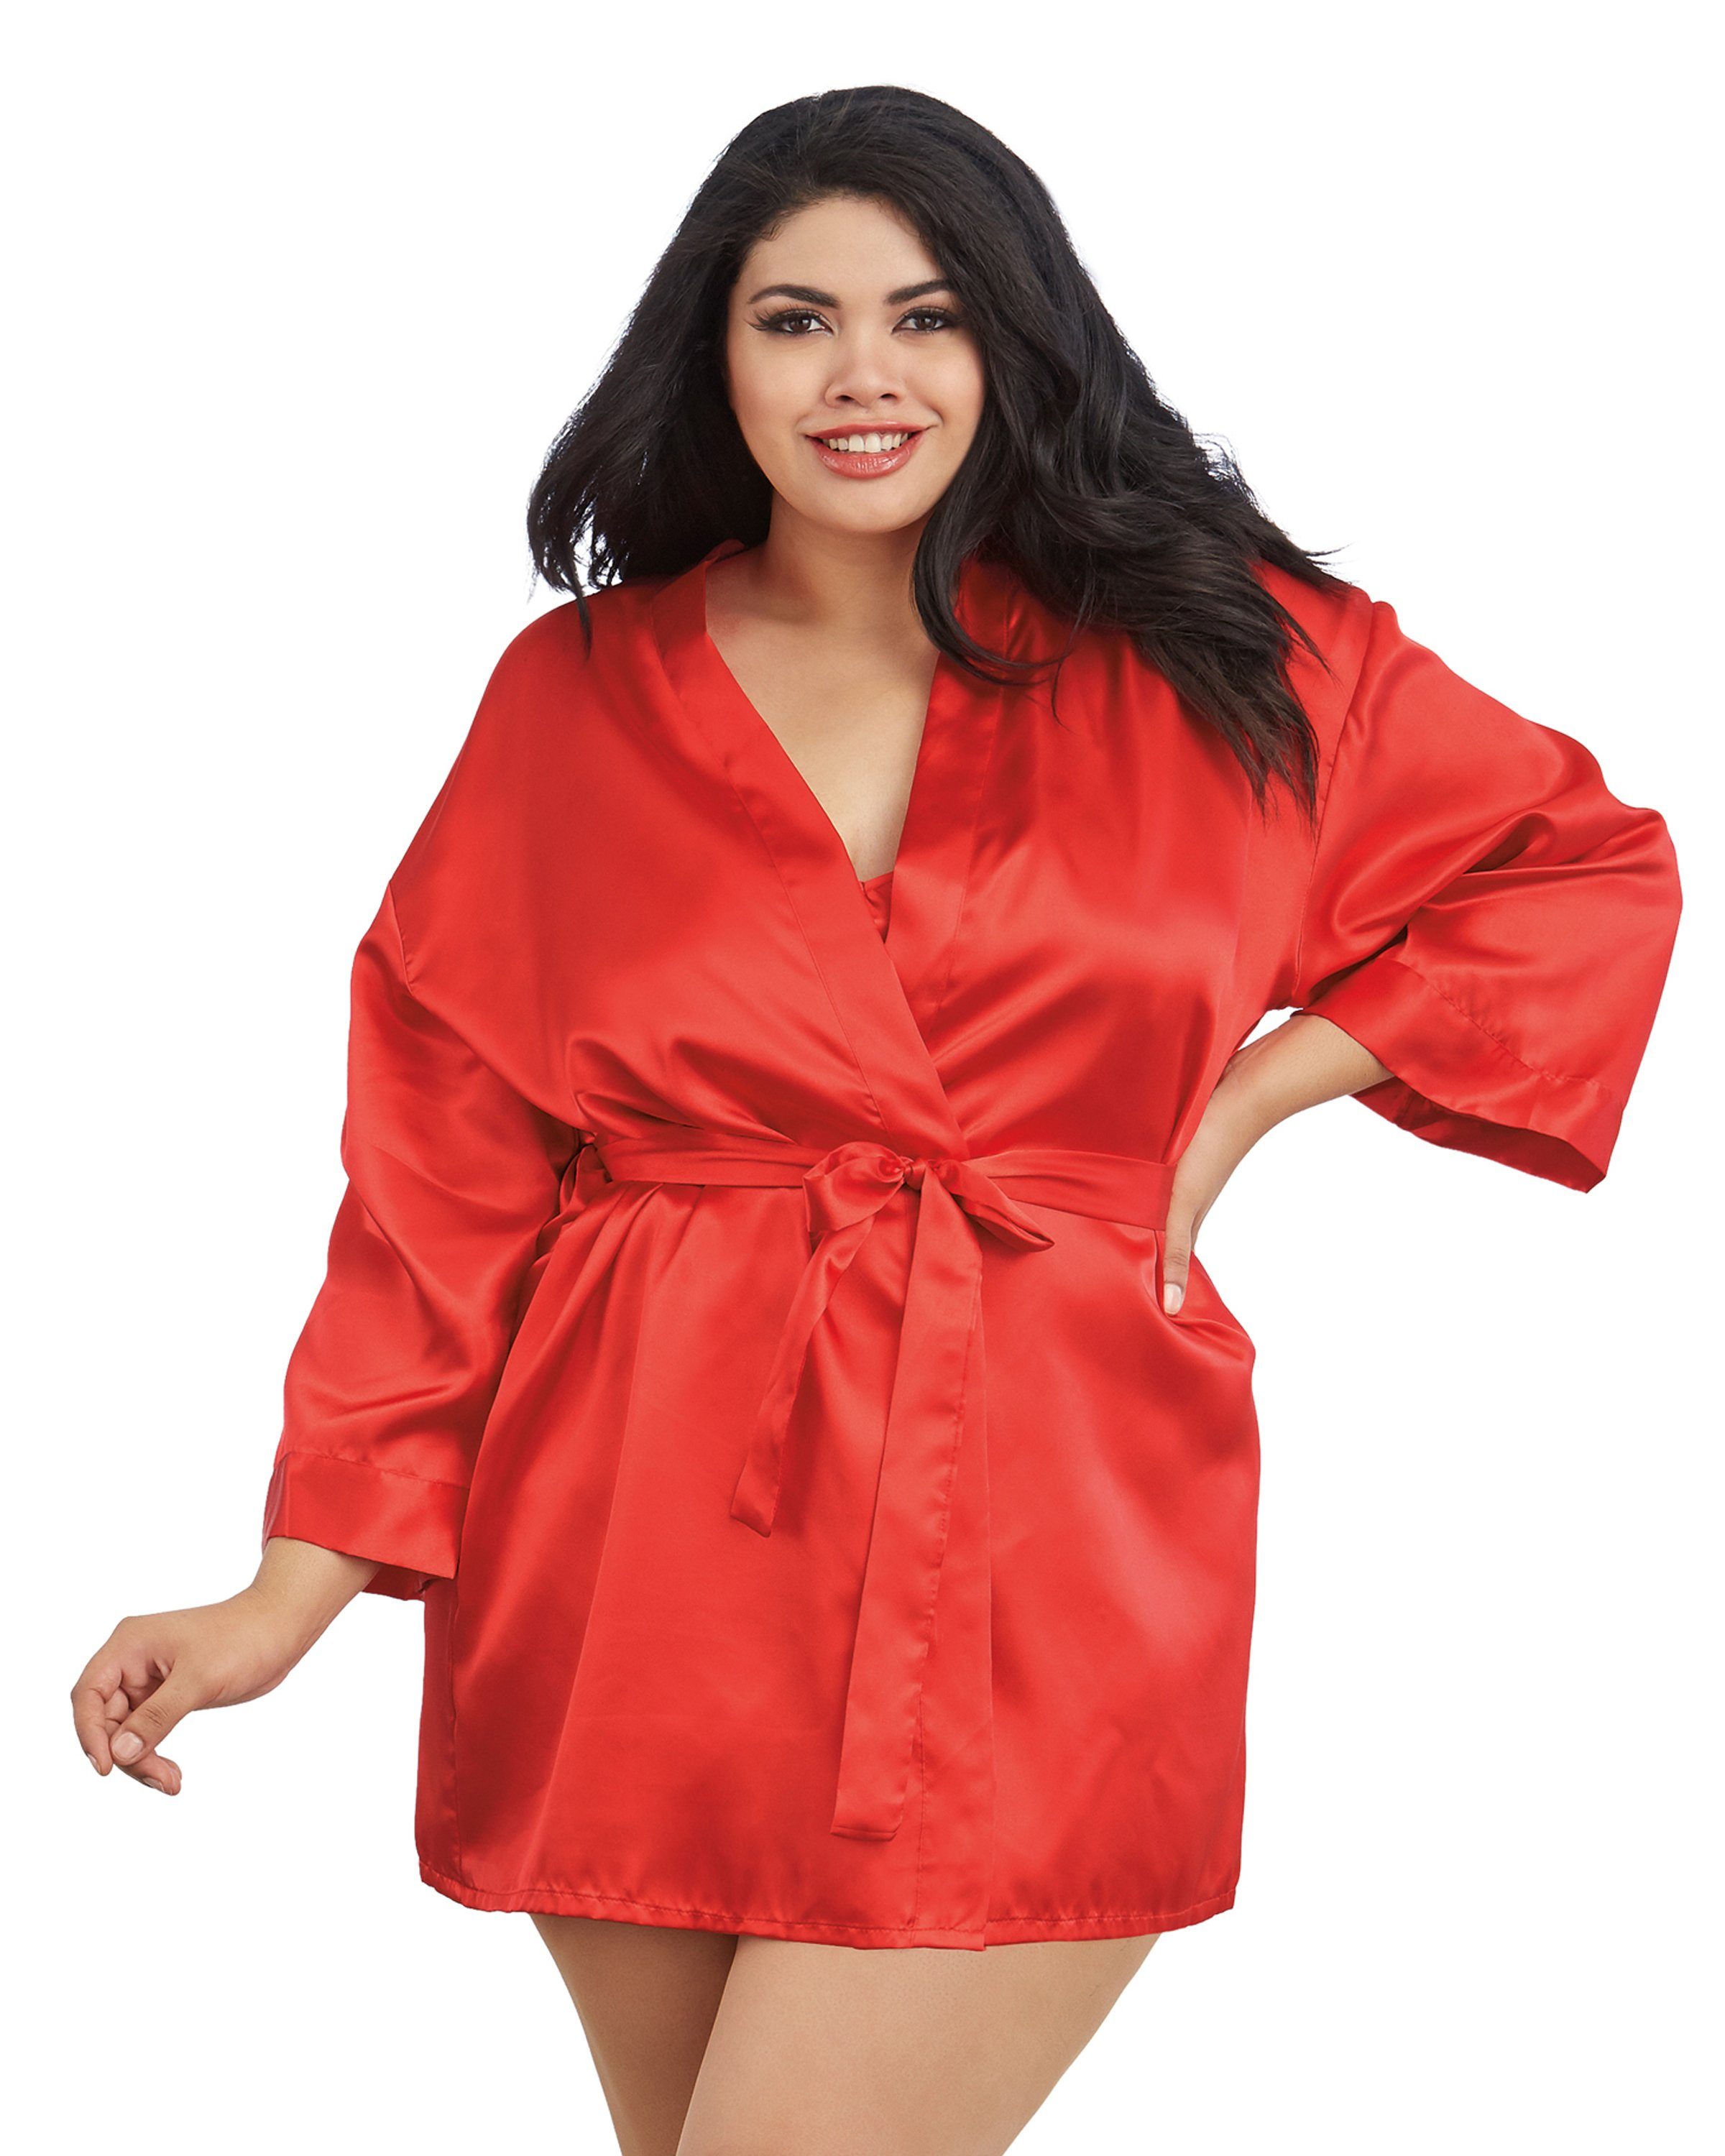 Plus Size Satin Robe & Chemise Set in Red – Dreamgirl